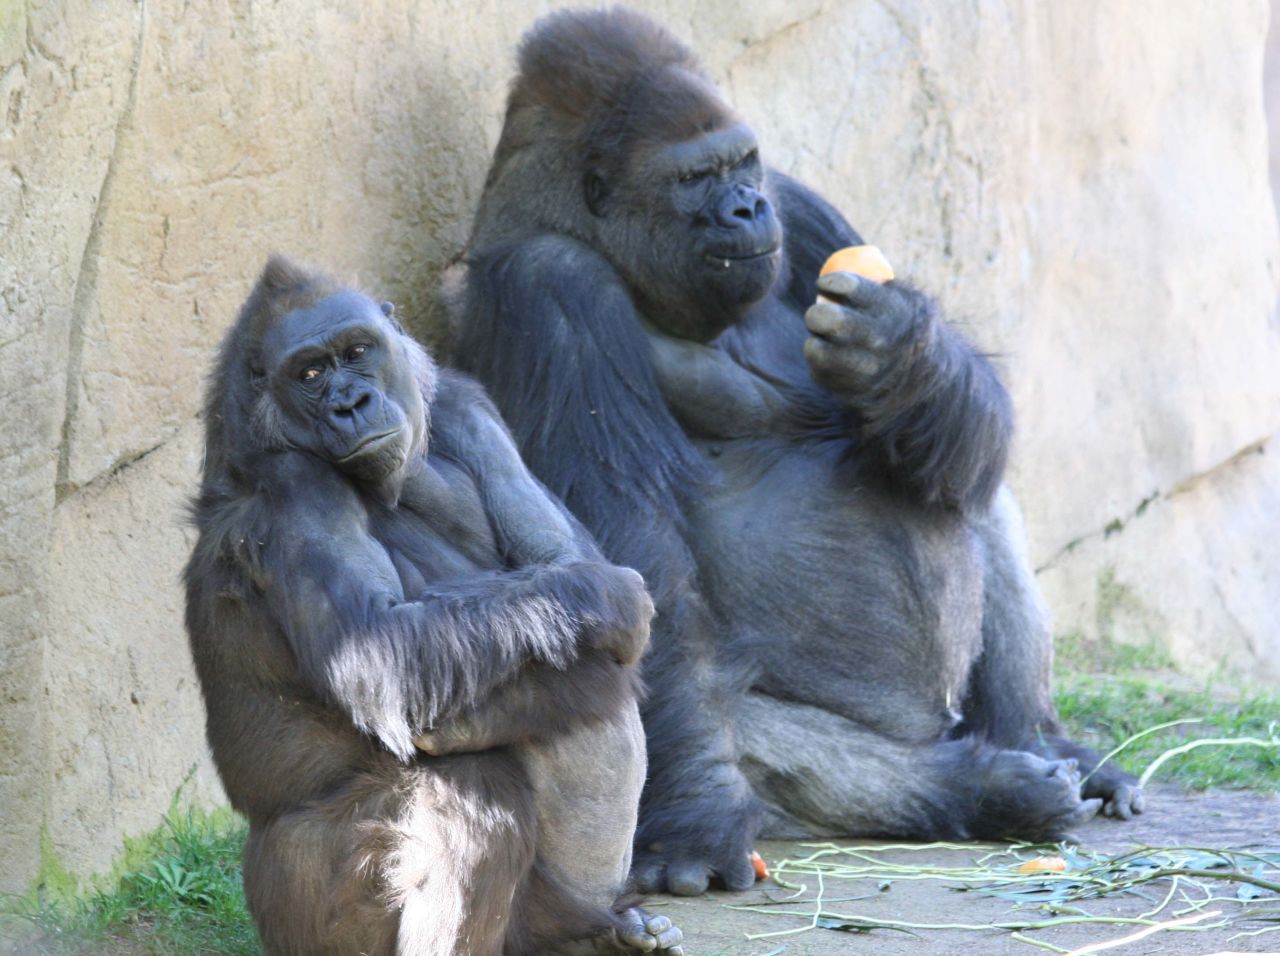 The complete DNA of a female western lowland gorilla called Kamilah (left) has been mapped by scientists, completing the set of genomes for all great apes (humans, chimpanzees, gorillas and orang-utans).  